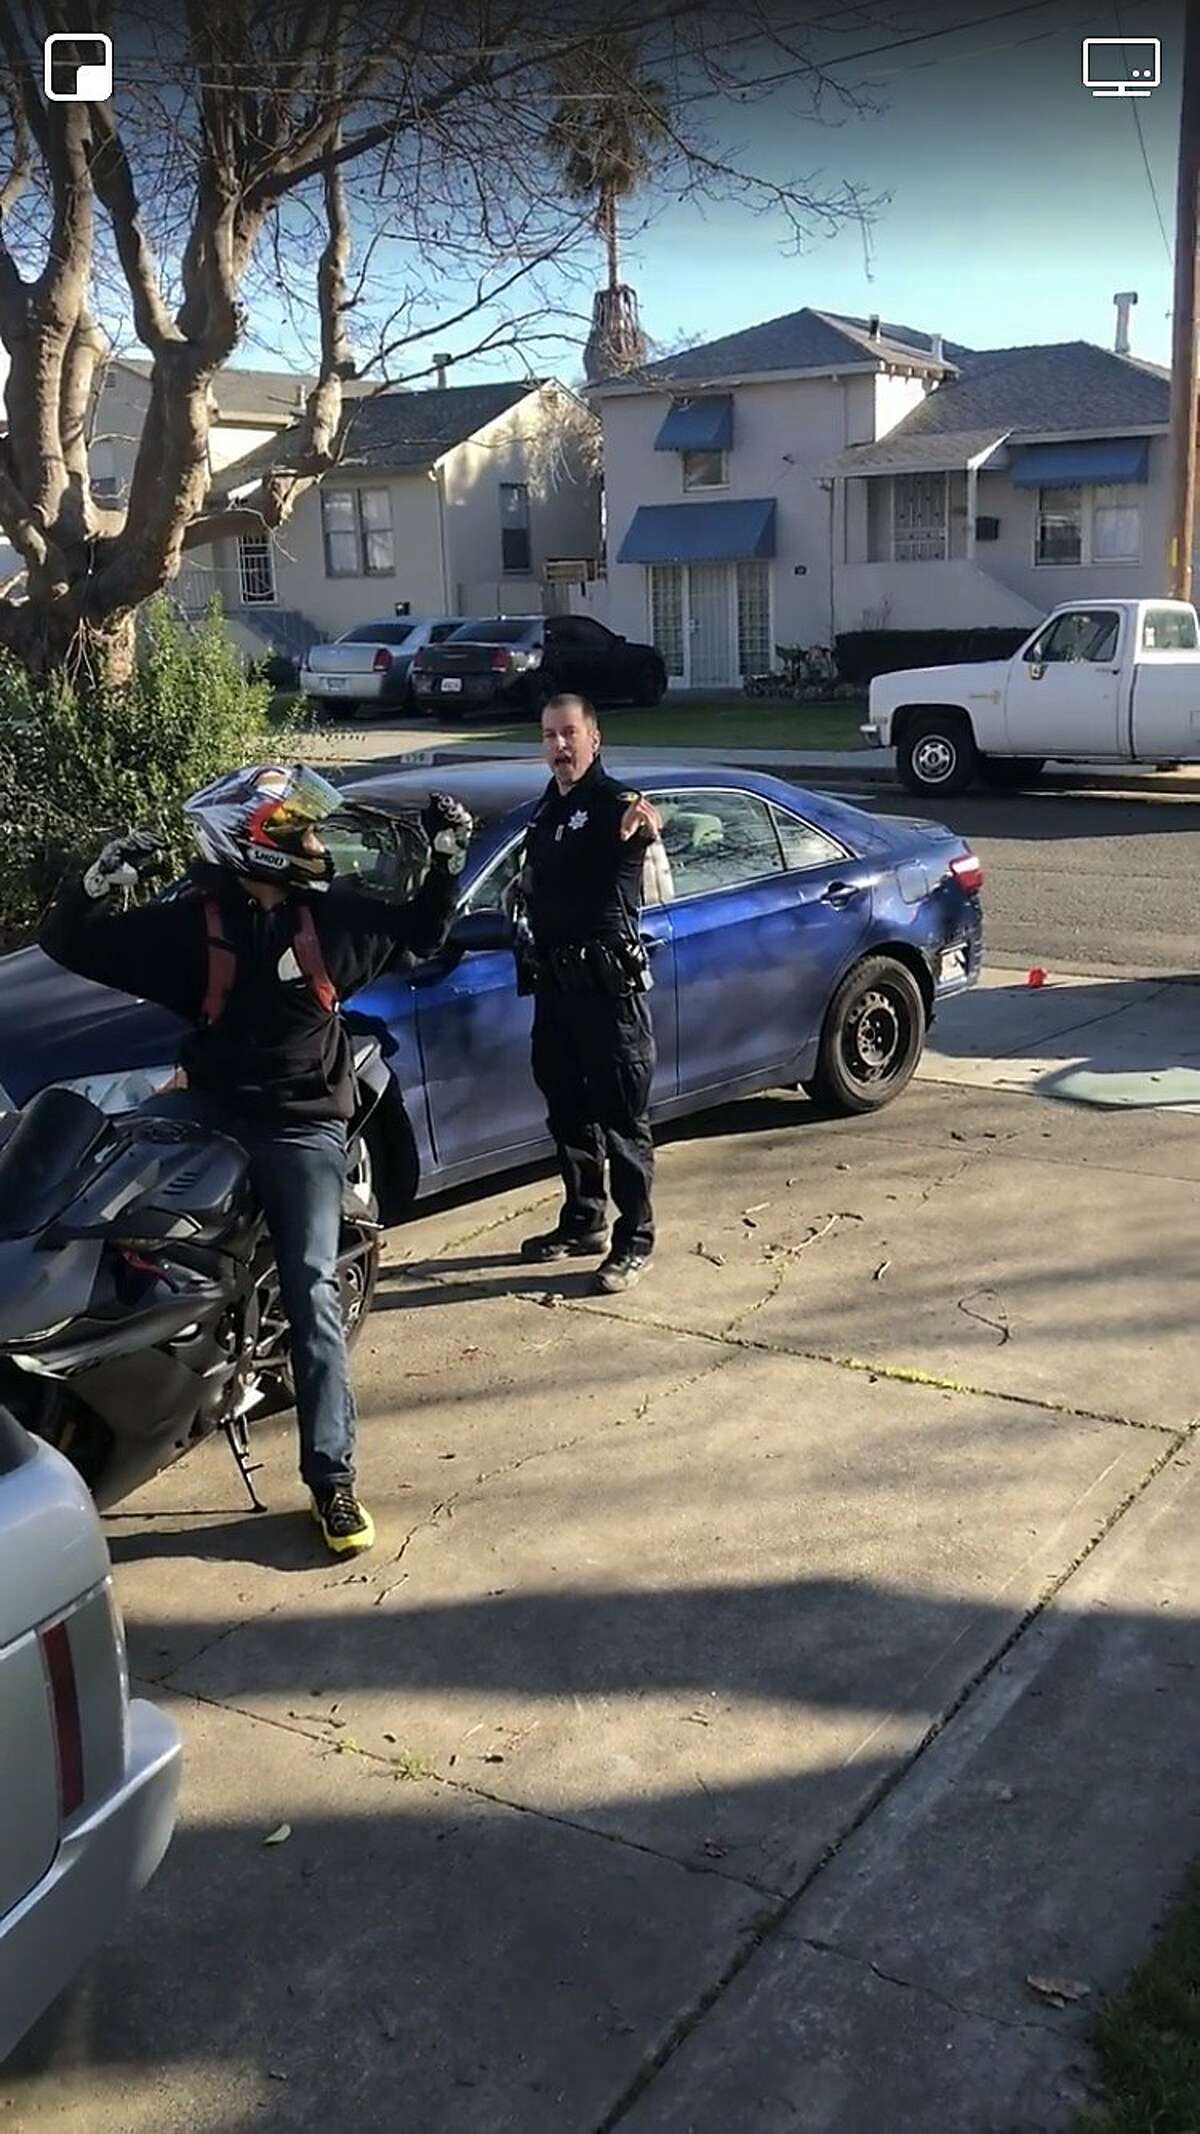 Adrian Burrell, 28, said he got a concussion when he says he was unjustly detained by a Vallejo police officer on Tuesday, Jan. 22, 2019. A screenshot from a cell phone video taken by Burrell during the incident shows an officer wearing a nameplate reading, "D. McLaughlin." Officer David McLaughlin was introduced as a new hire to the Vallejo Police Department in May 2014, according to a Vallejo City Manager's report.